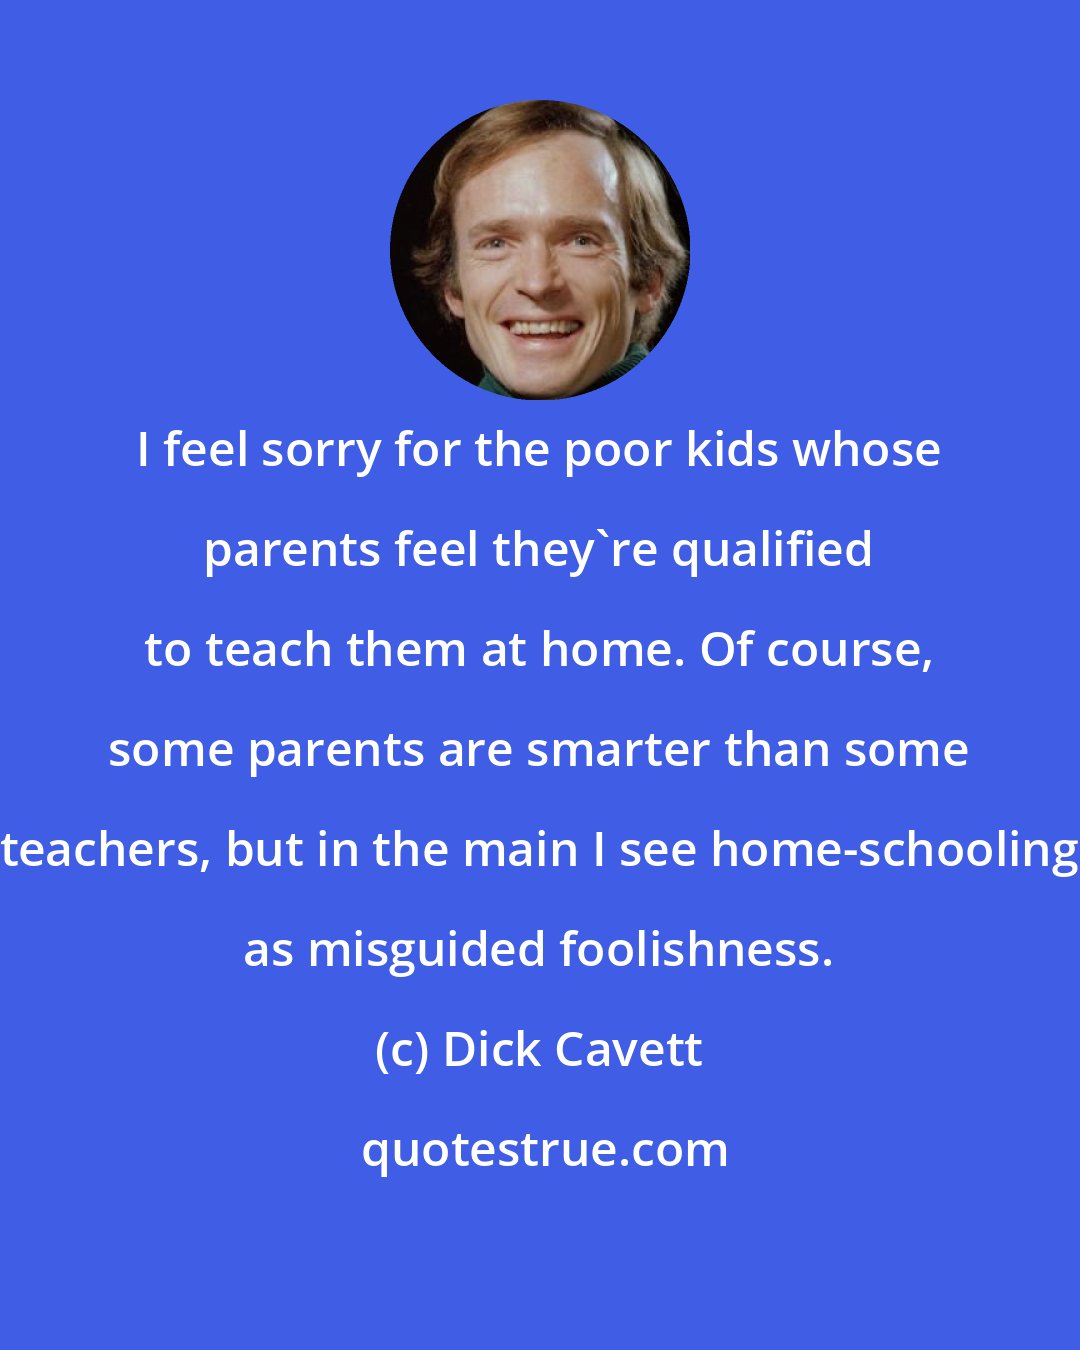 Dick Cavett: I feel sorry for the poor kids whose parents feel they're qualified to teach them at home. Of course, some parents are smarter than some teachers, but in the main I see home-schooling as misguided foolishness.